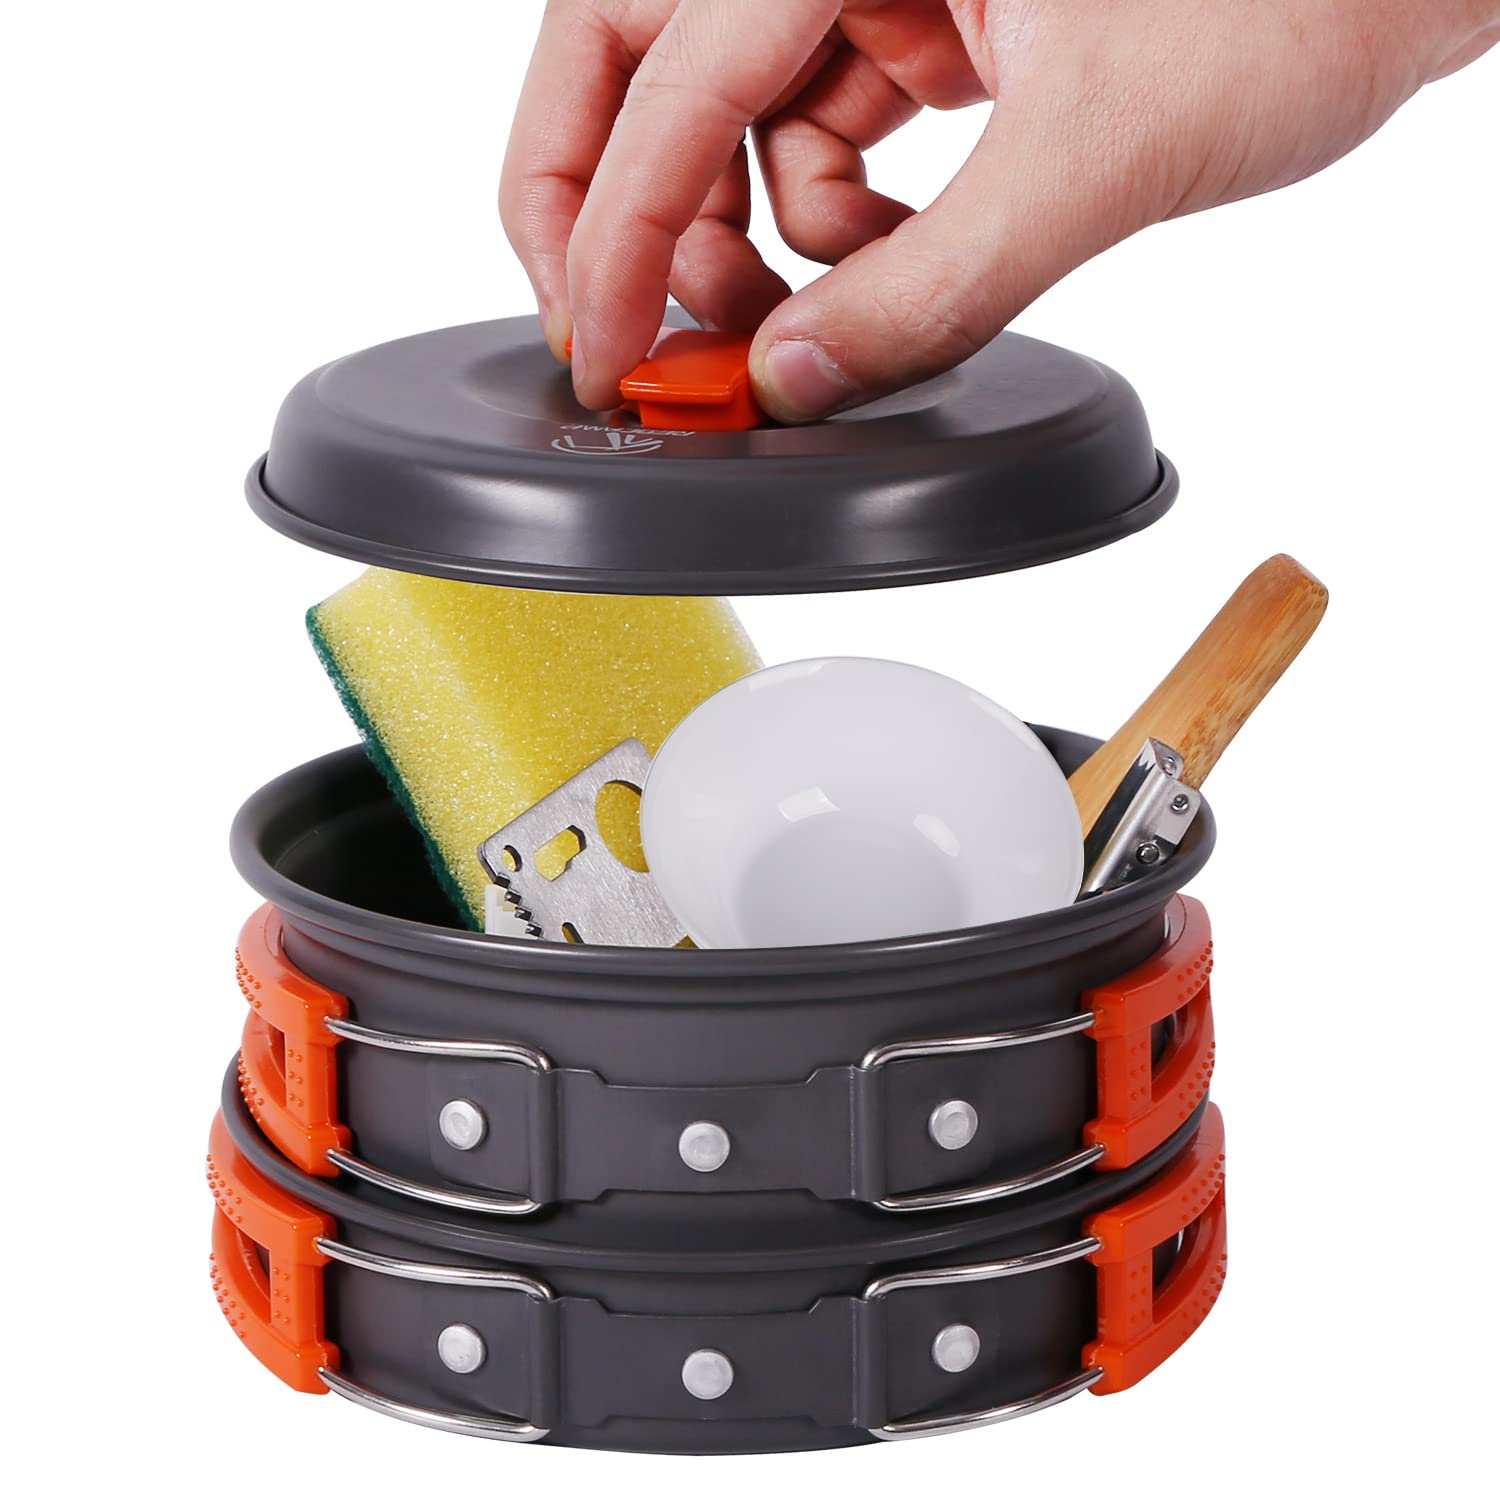 PCS Camping Cookware Mess Kit, Backpacking Camping Pot+Pan Set, Lightweight and Compact Cookware for Hiking,